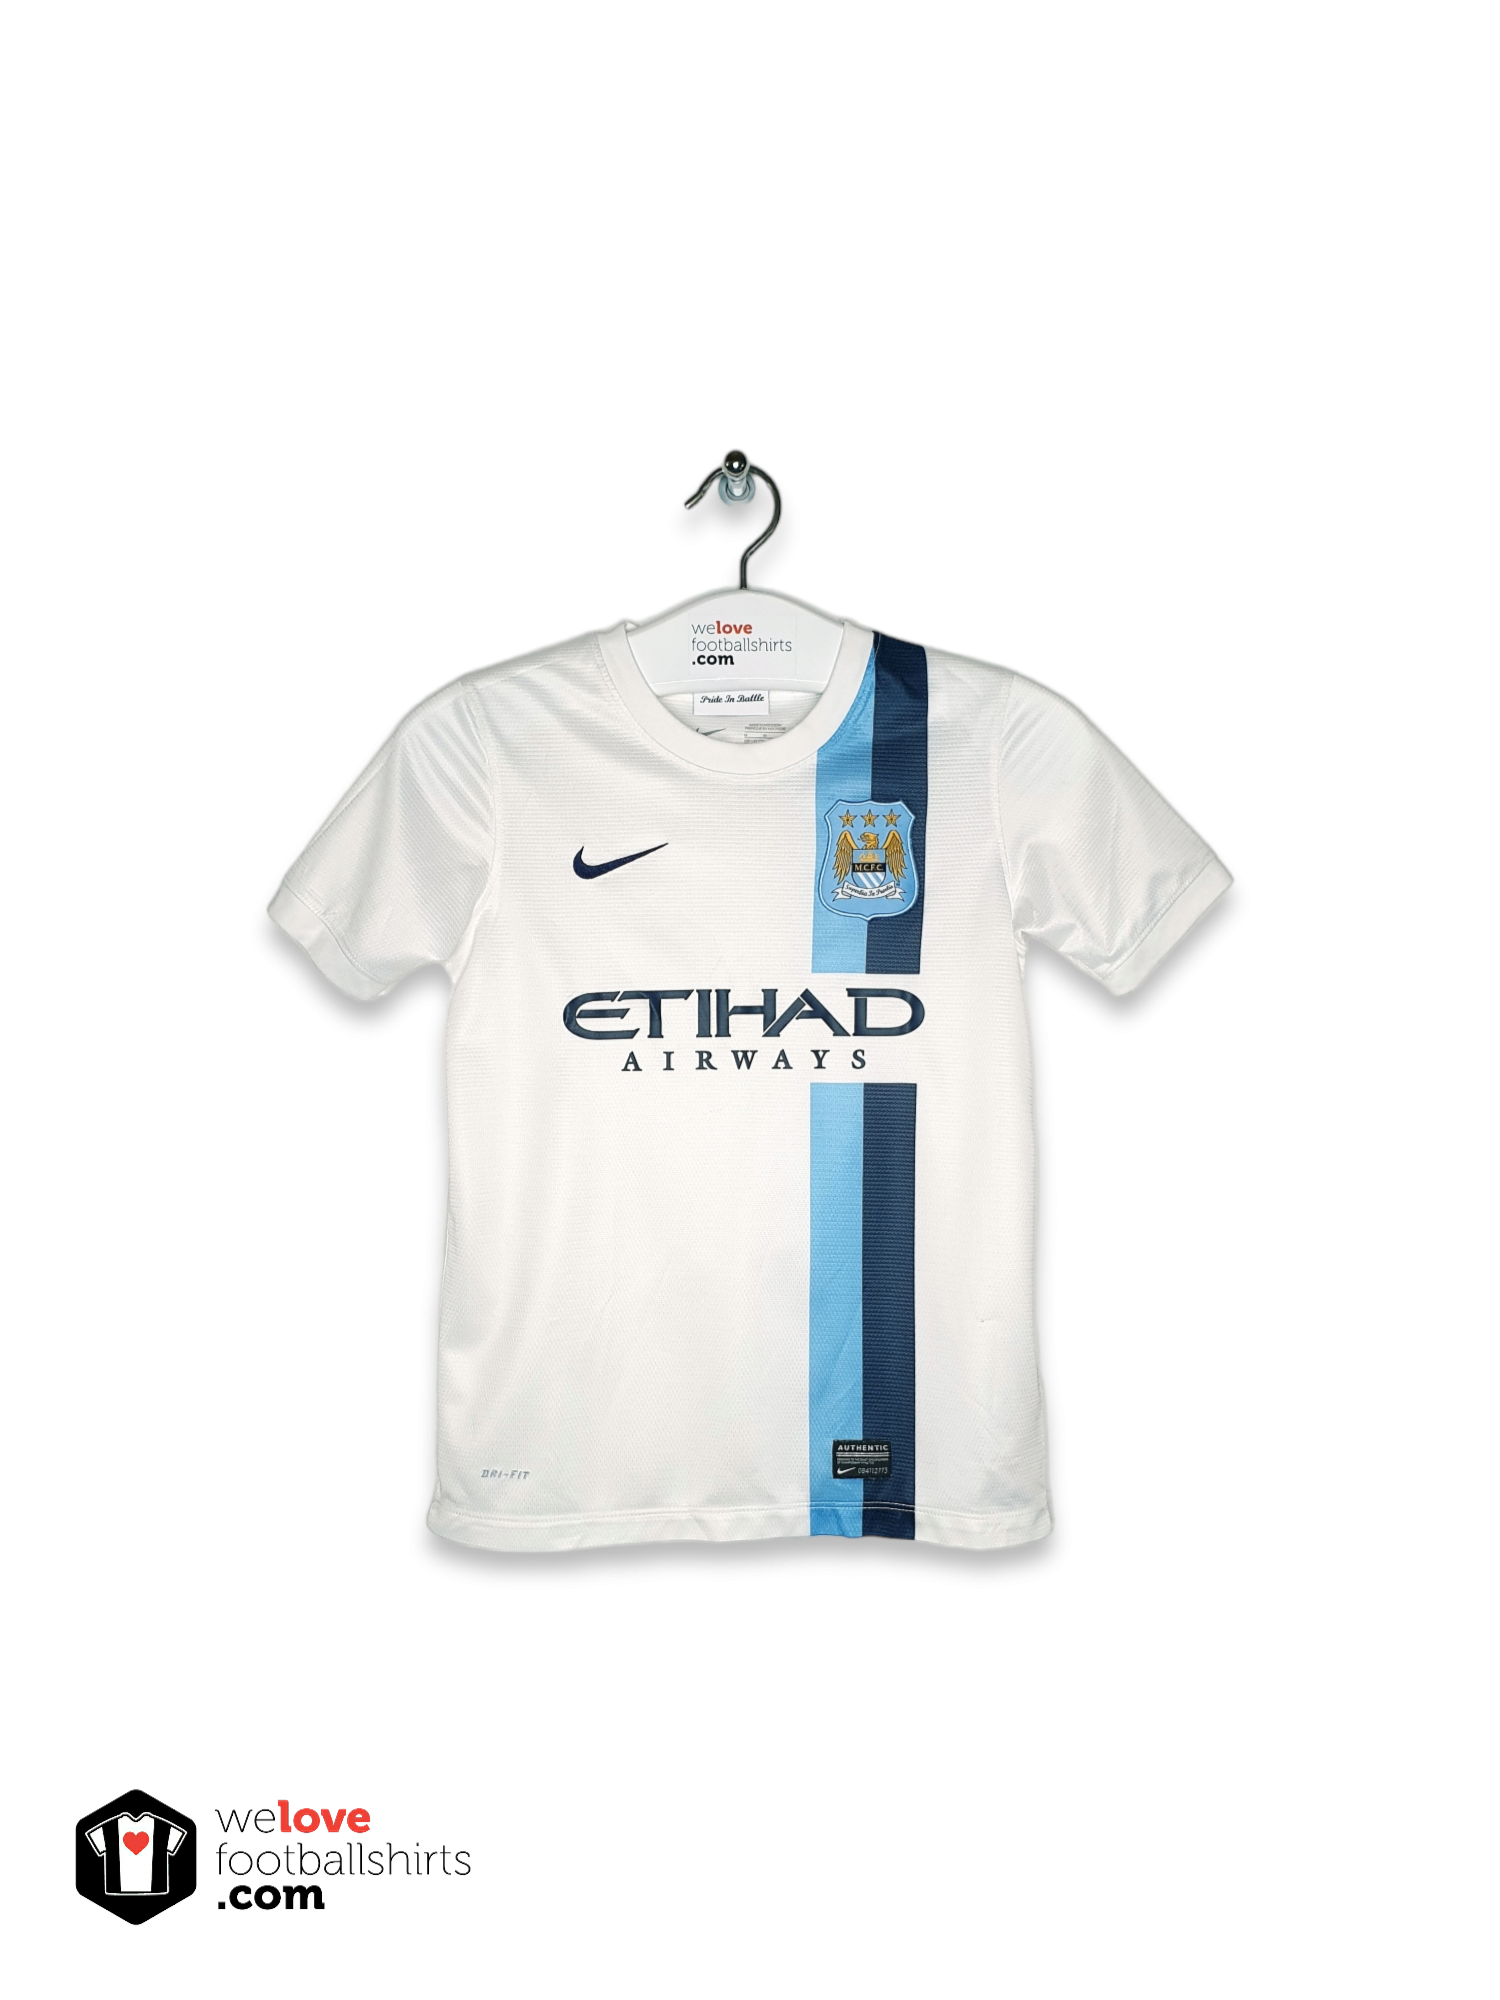 Maillot MANCHESTER CITY 2014 NIKE shirt jersey 3rd football collection S